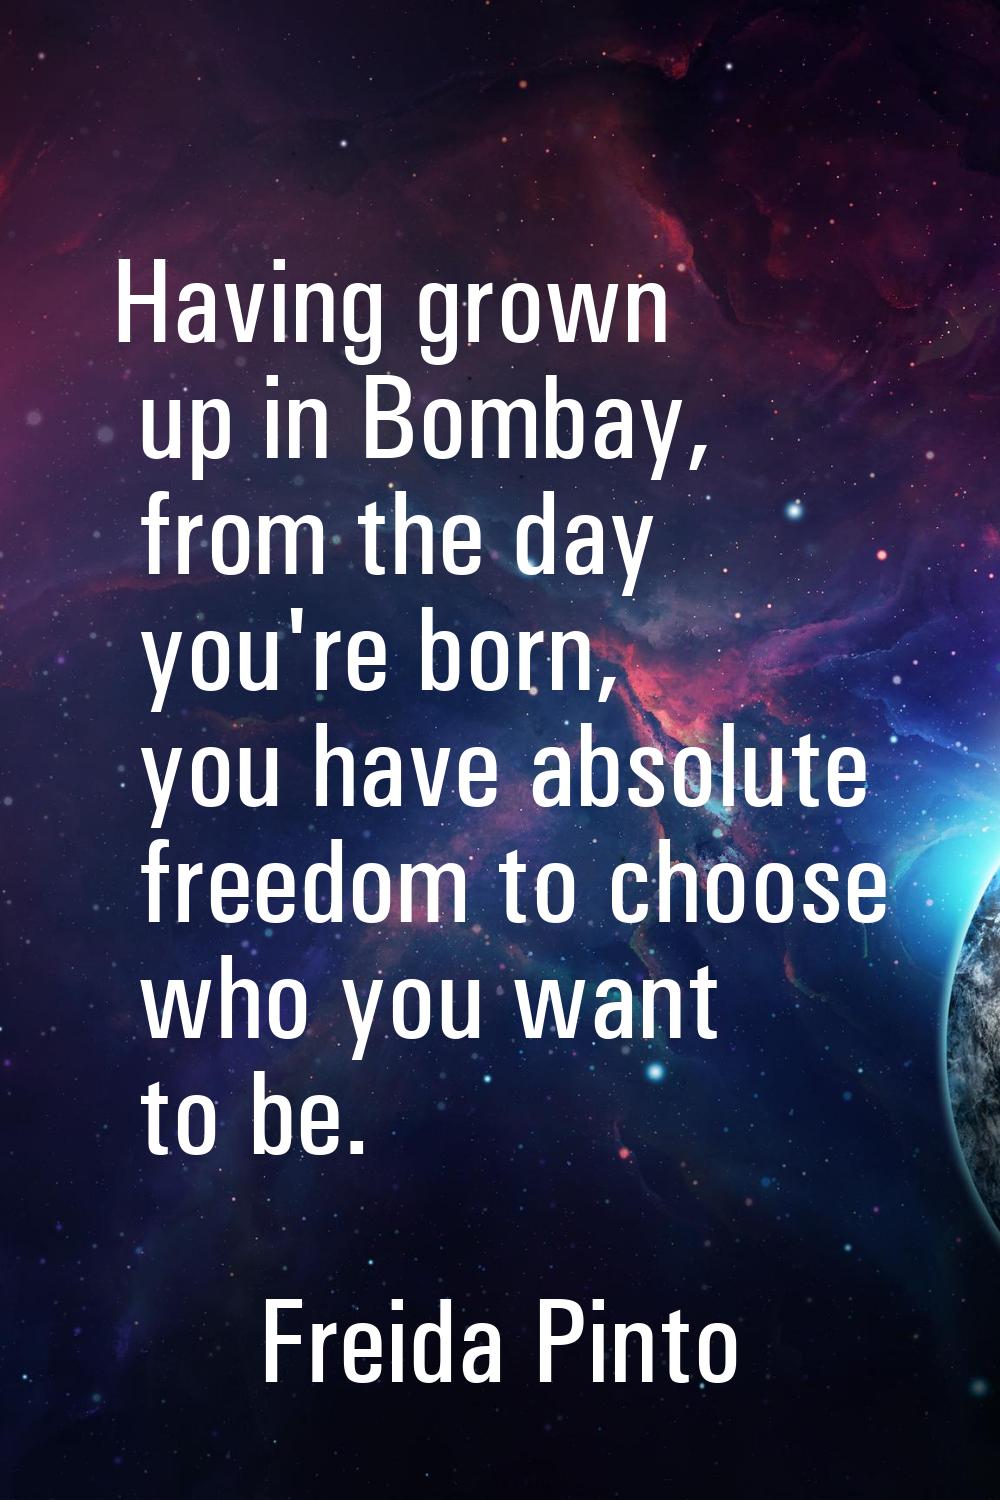 Having grown up in Bombay, from the day you're born, you have absolute freedom to choose who you wa